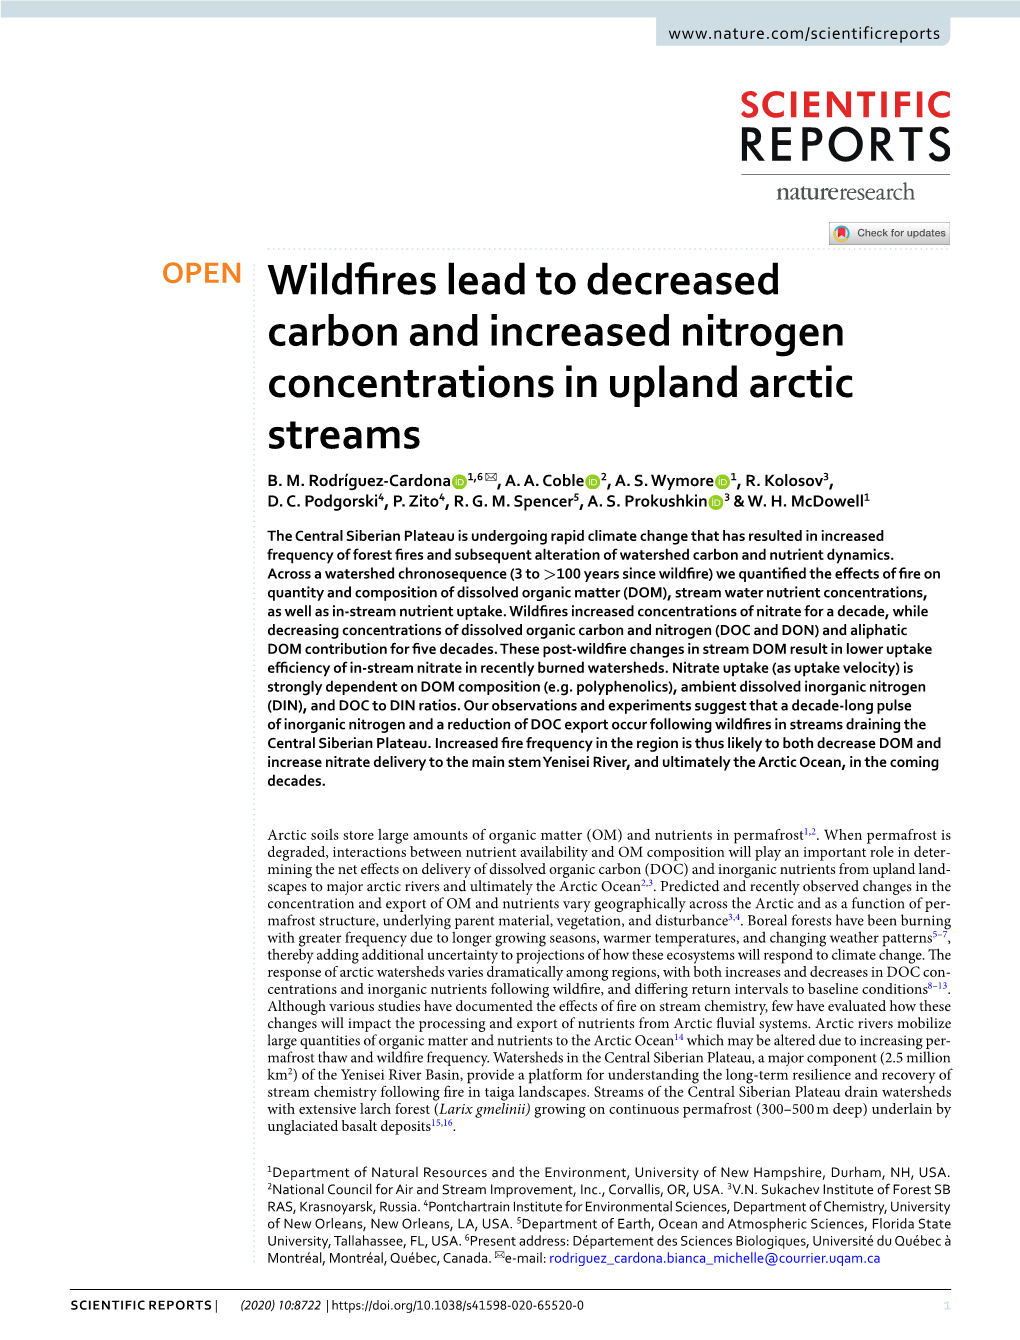 Wildfires Lead to Decreased Carbon and Increased Nitrogen